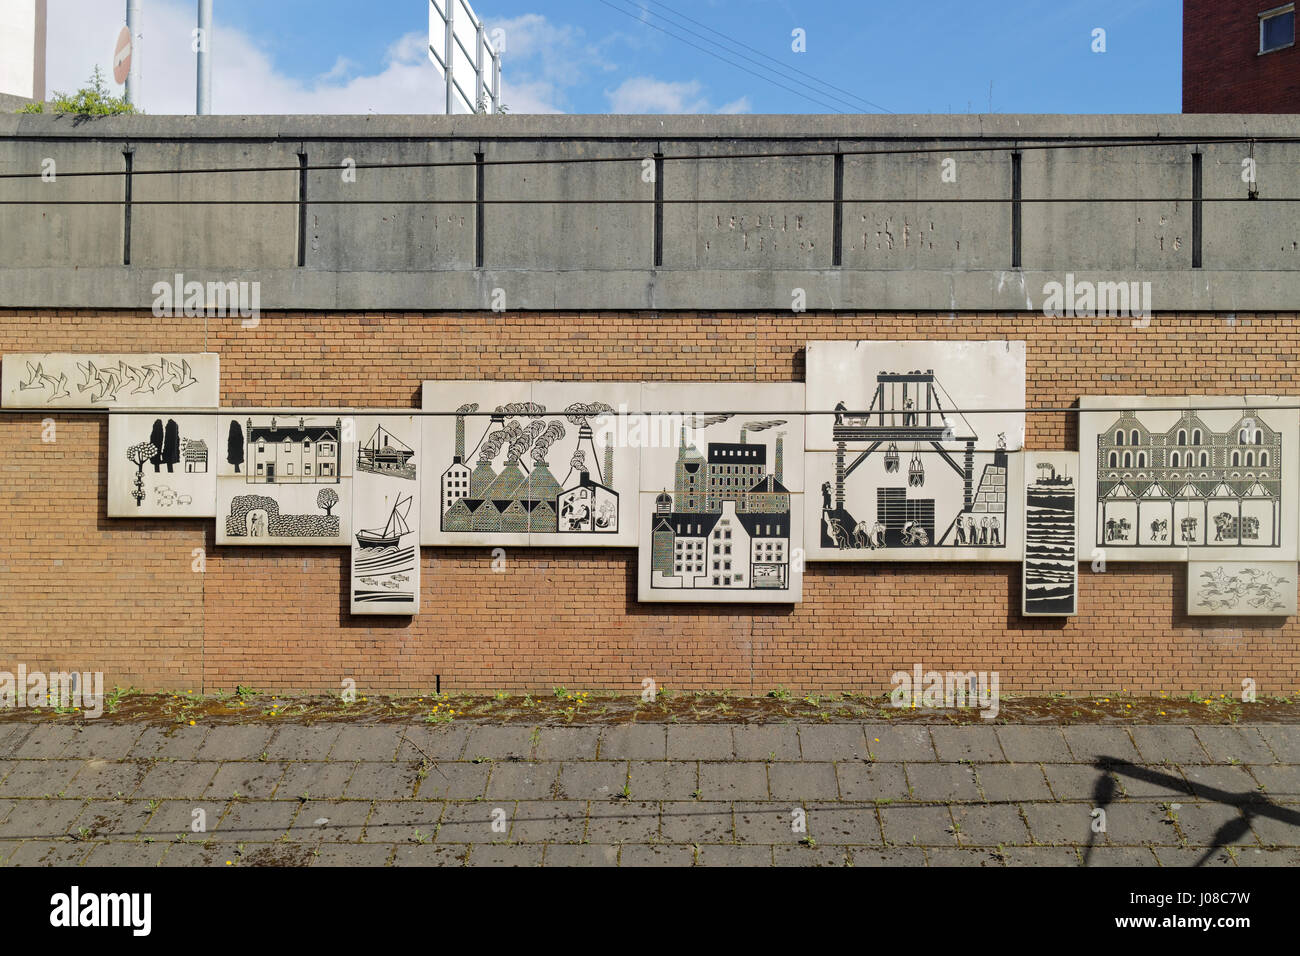 The former Finnieston railway station public art mural  from the 1970s celebrating the new and old  Glasgow civic confidence Stock Photo